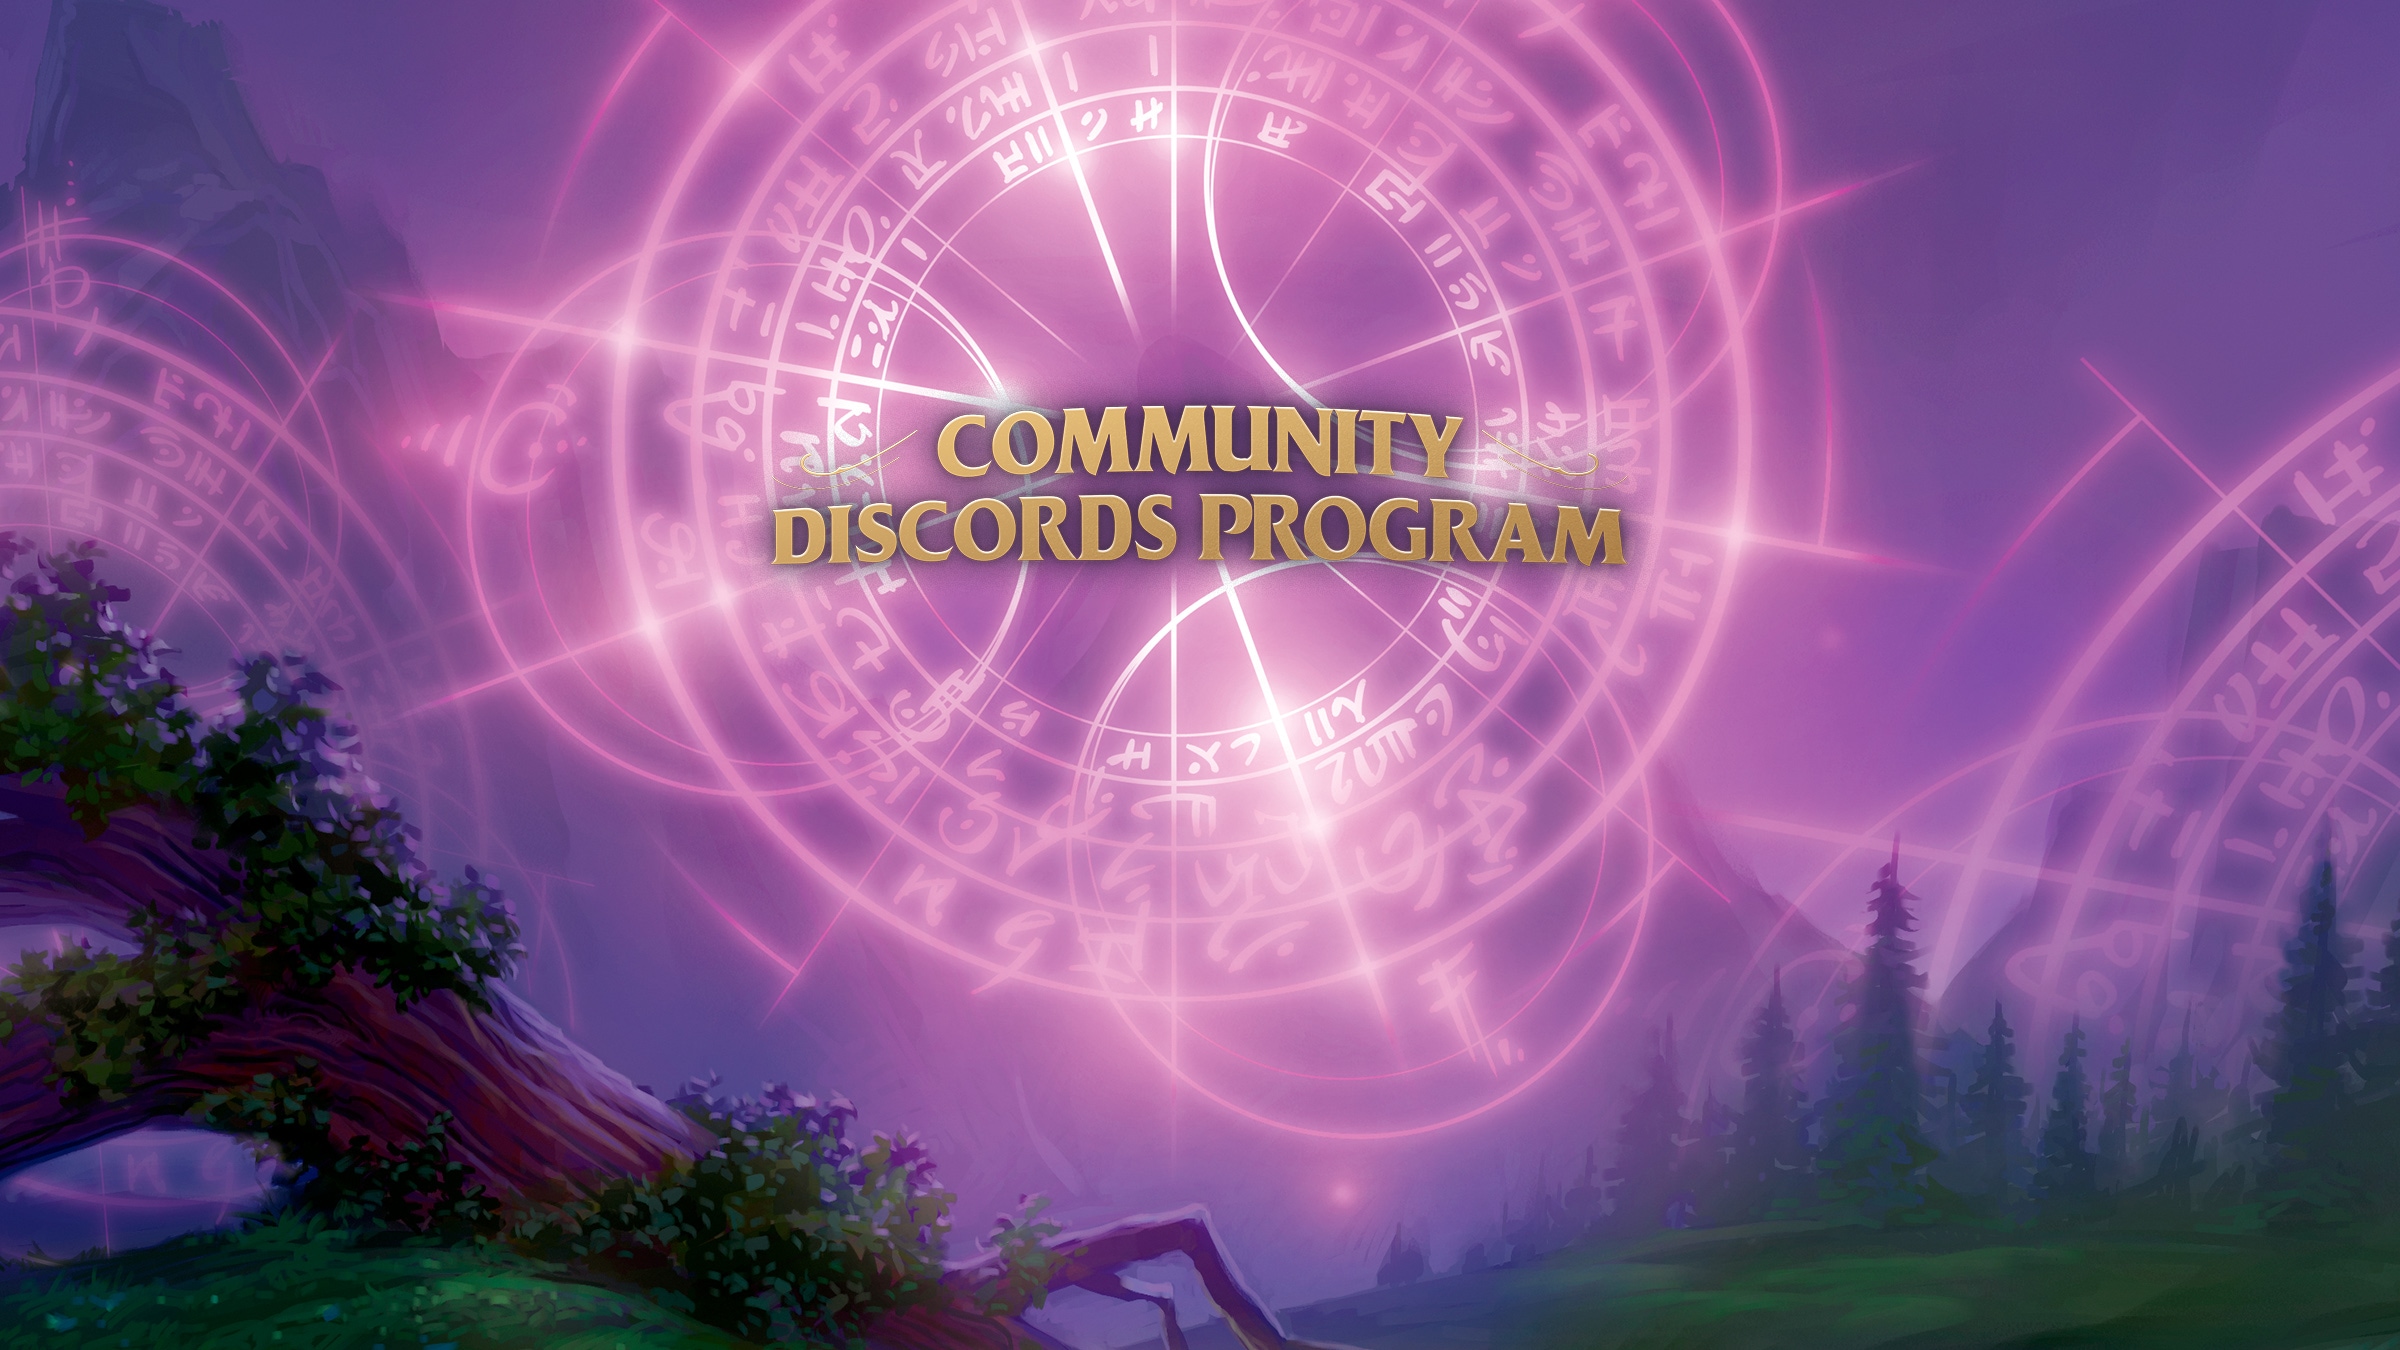 Join the Fun of the Community Discords Program